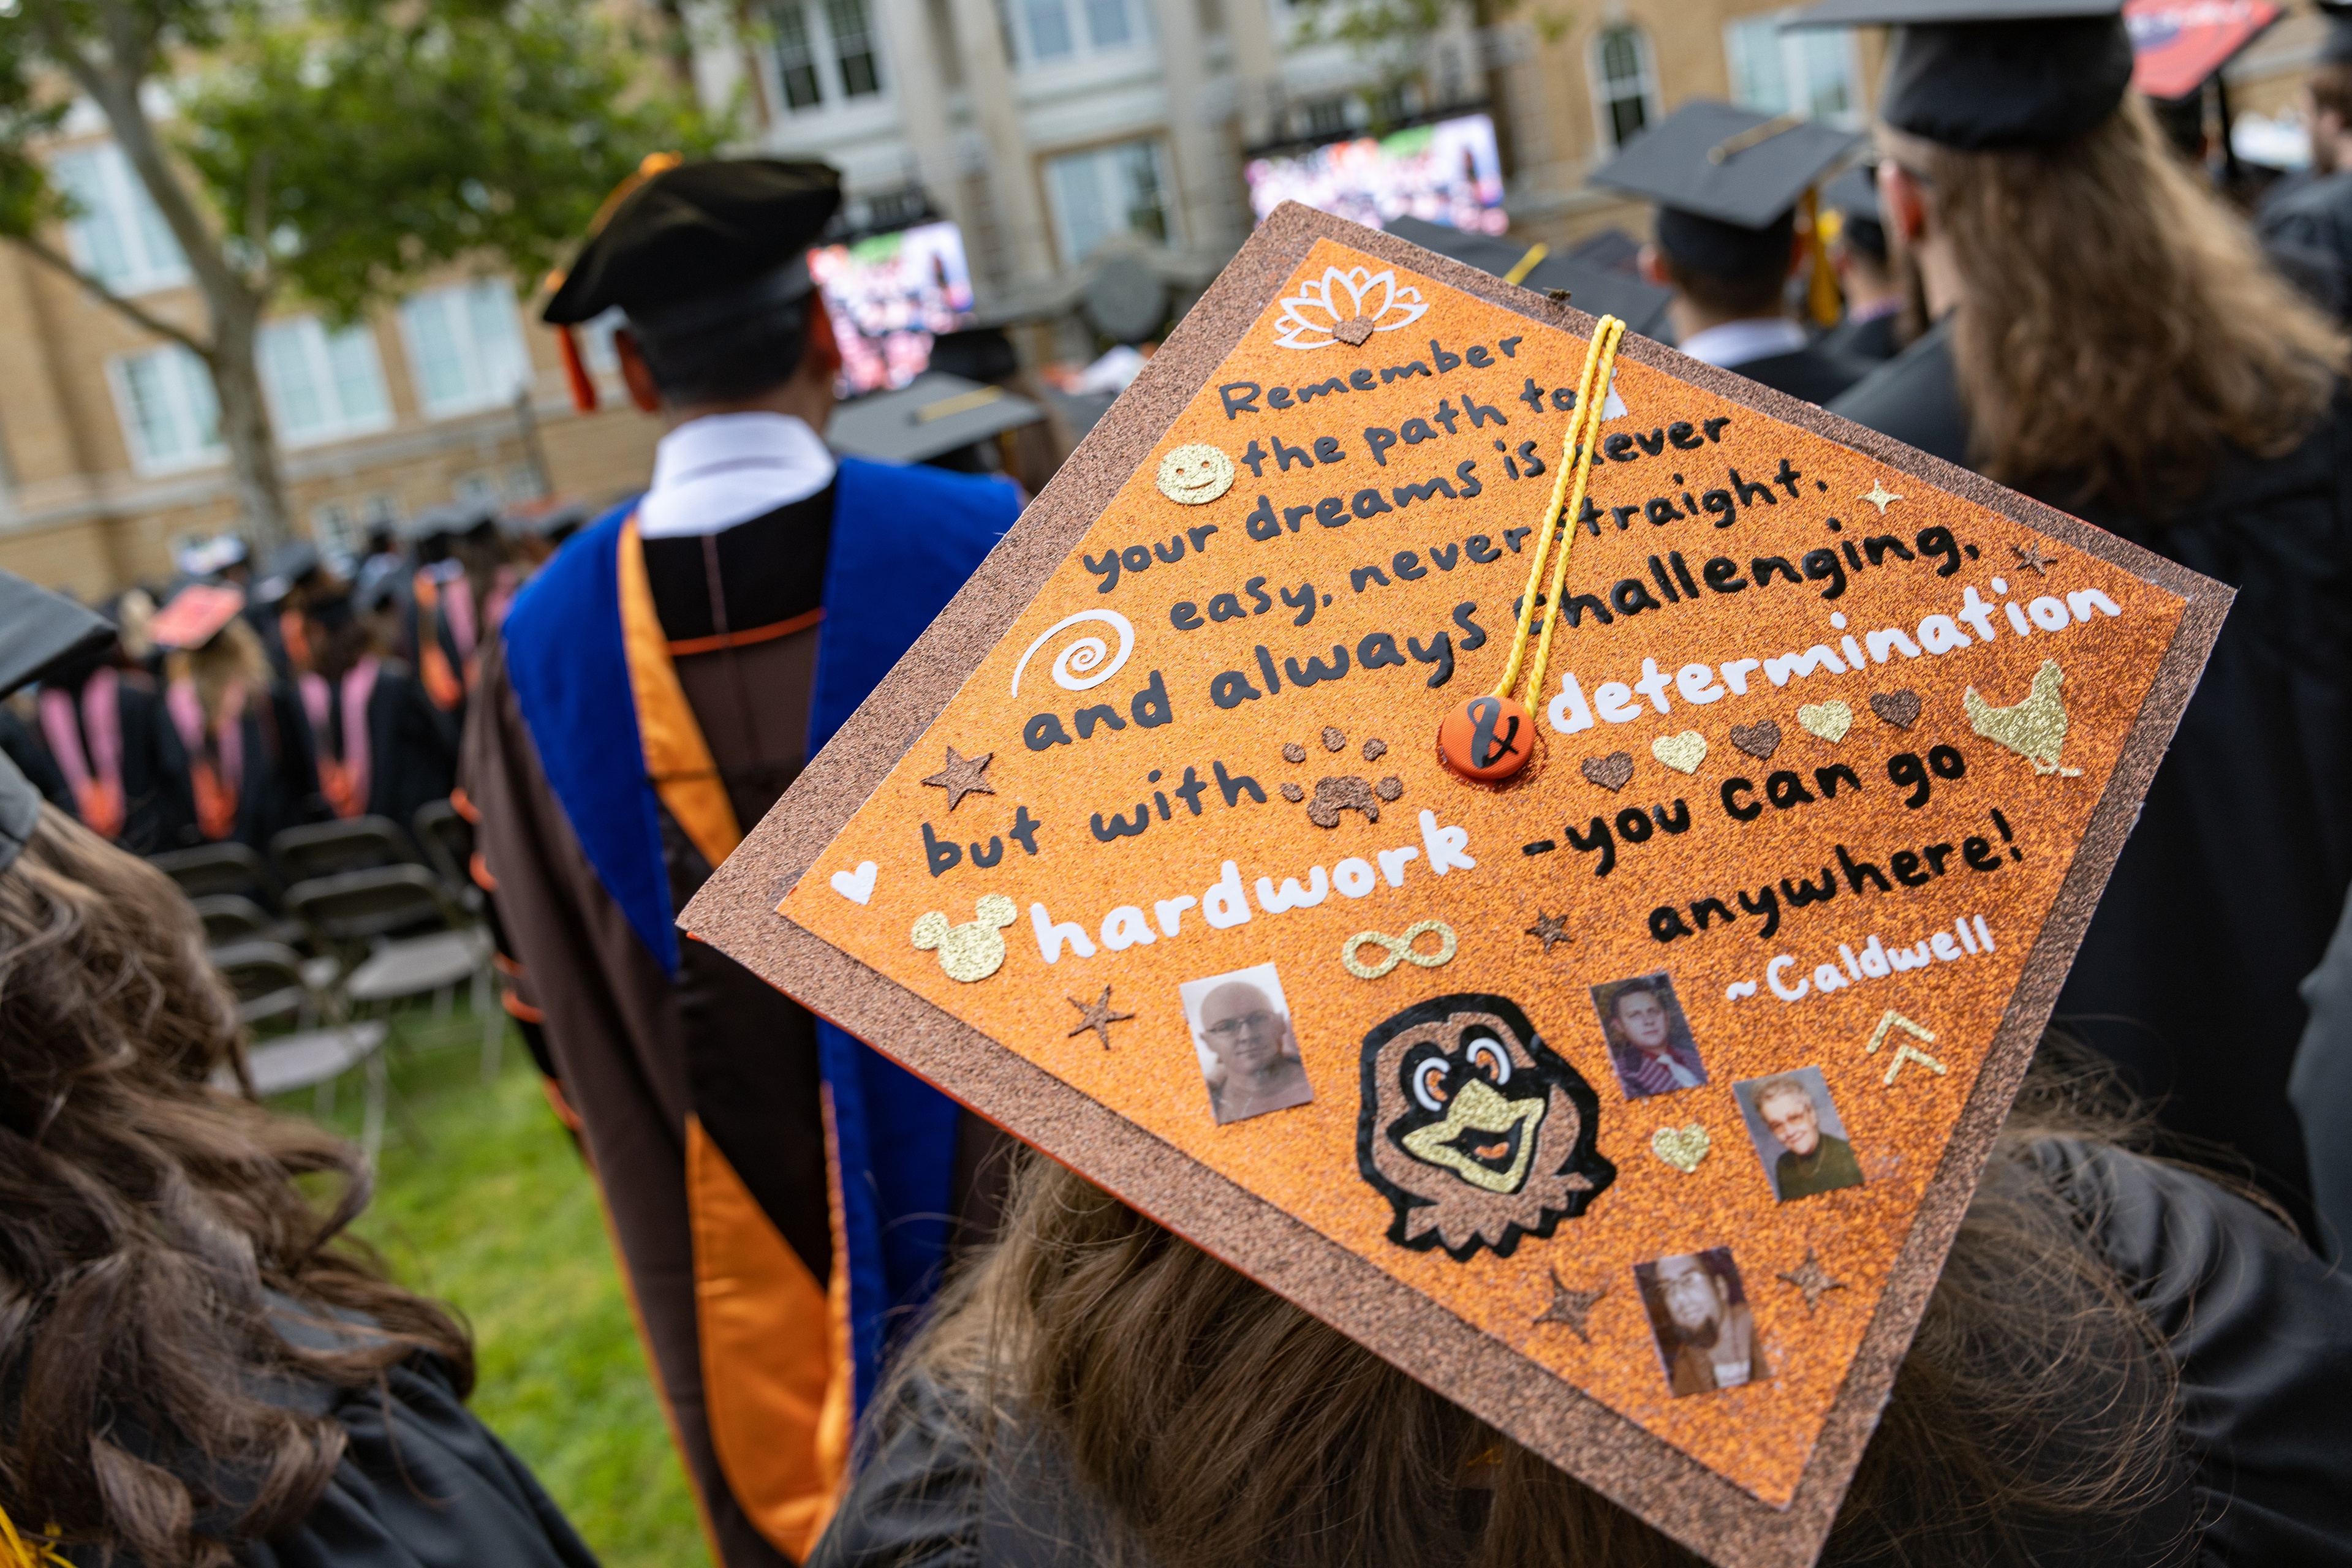 Graduation cap says “Remember the path to your dream is never easy, never straight, and always challenging. But with determination and hard work, you can go anywhere! - Caldwell"